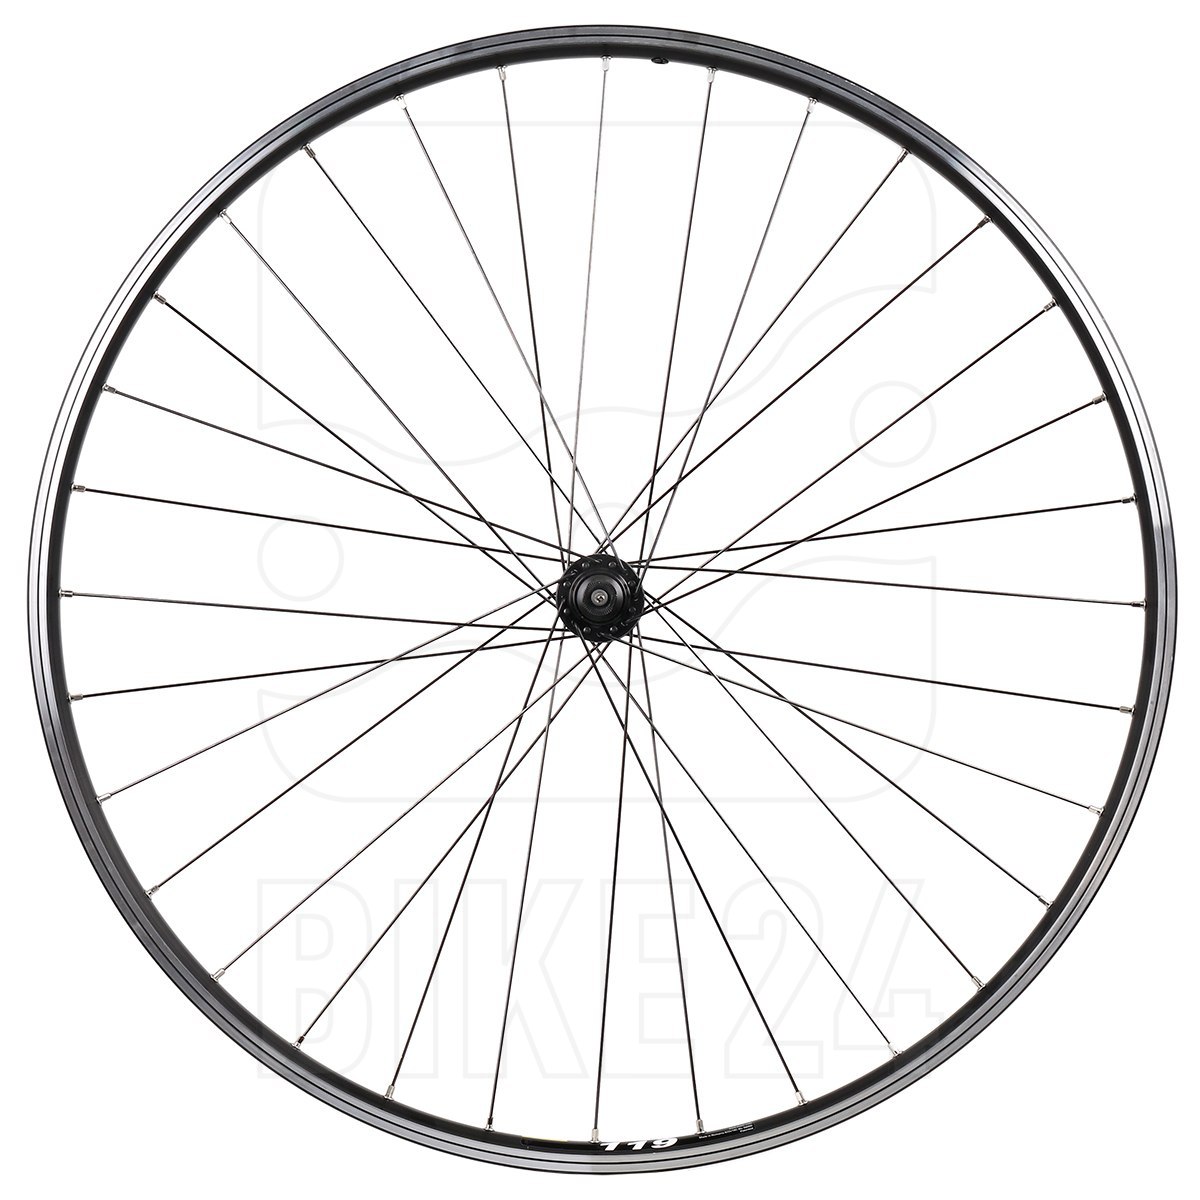 Picture of Shimano | Mavic - Deore Trekking HB-T610 | A 119 - 28 Inch Front Wheel - Rim Brakes - QR